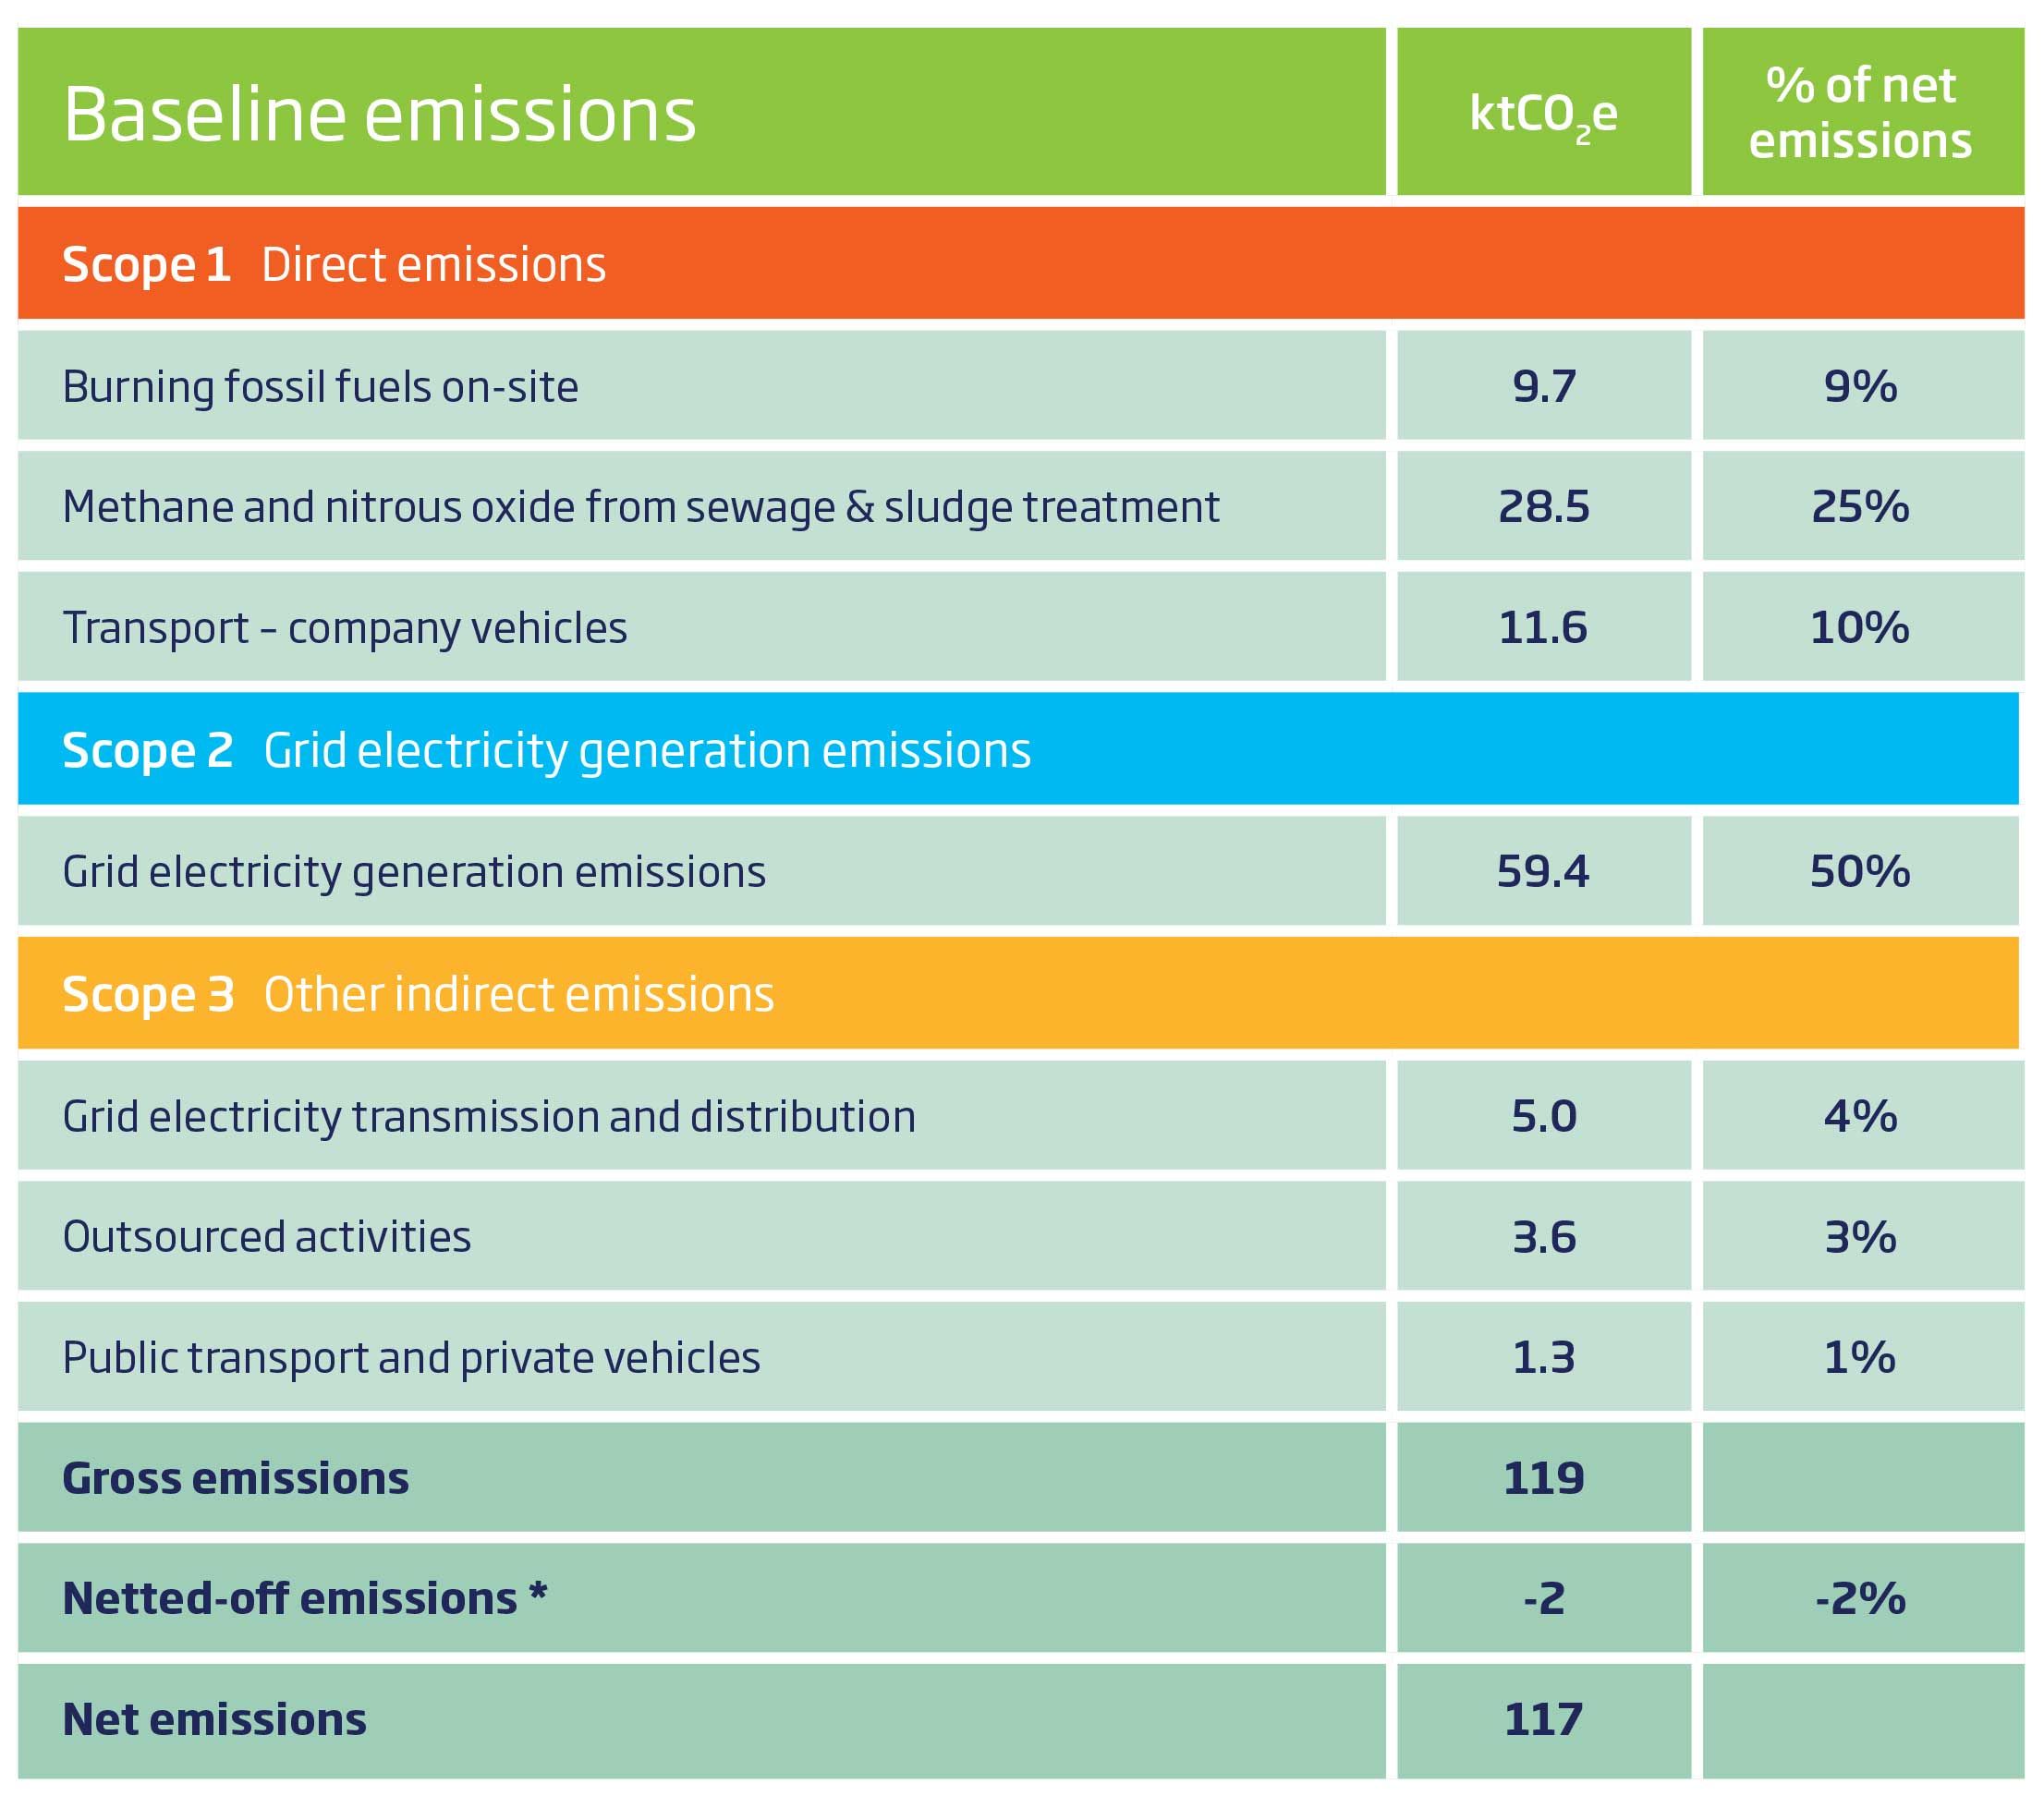 Wessex water baseline emissions table with statistics from 2019-2020